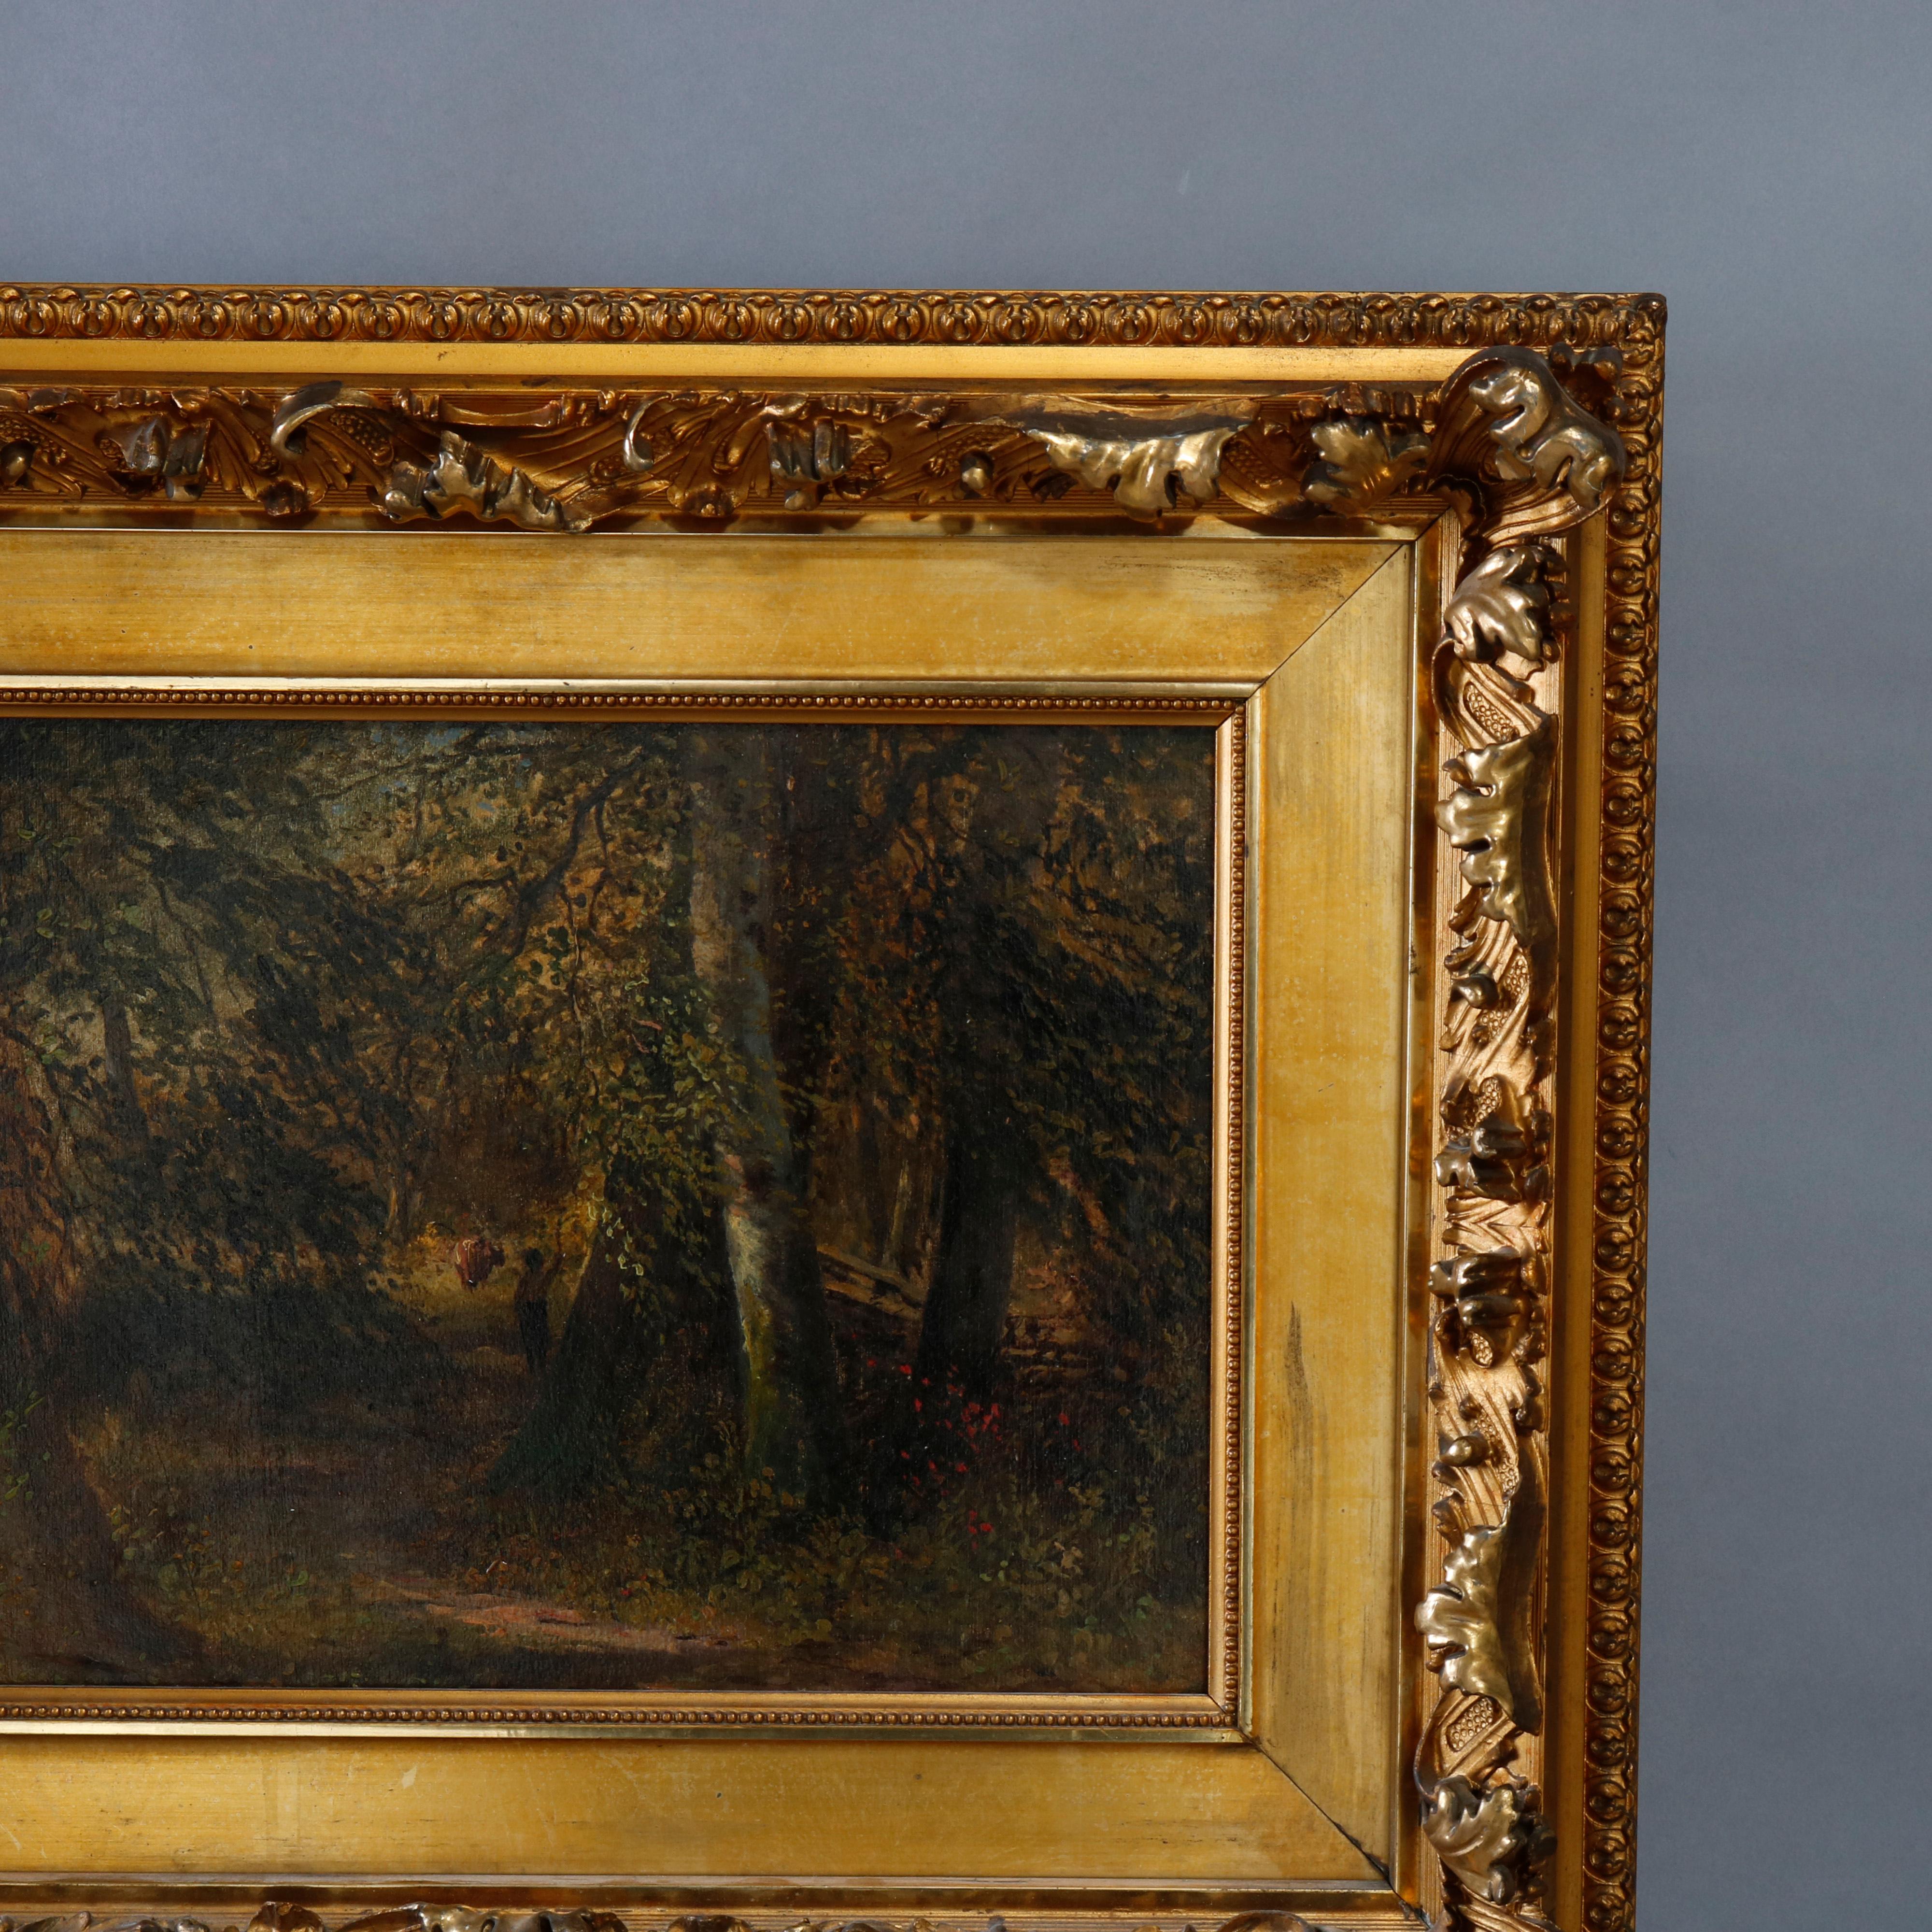 Wood Antique Painting of Forest Landscape with Figures, Ornate Giltwood Frame, c 1890